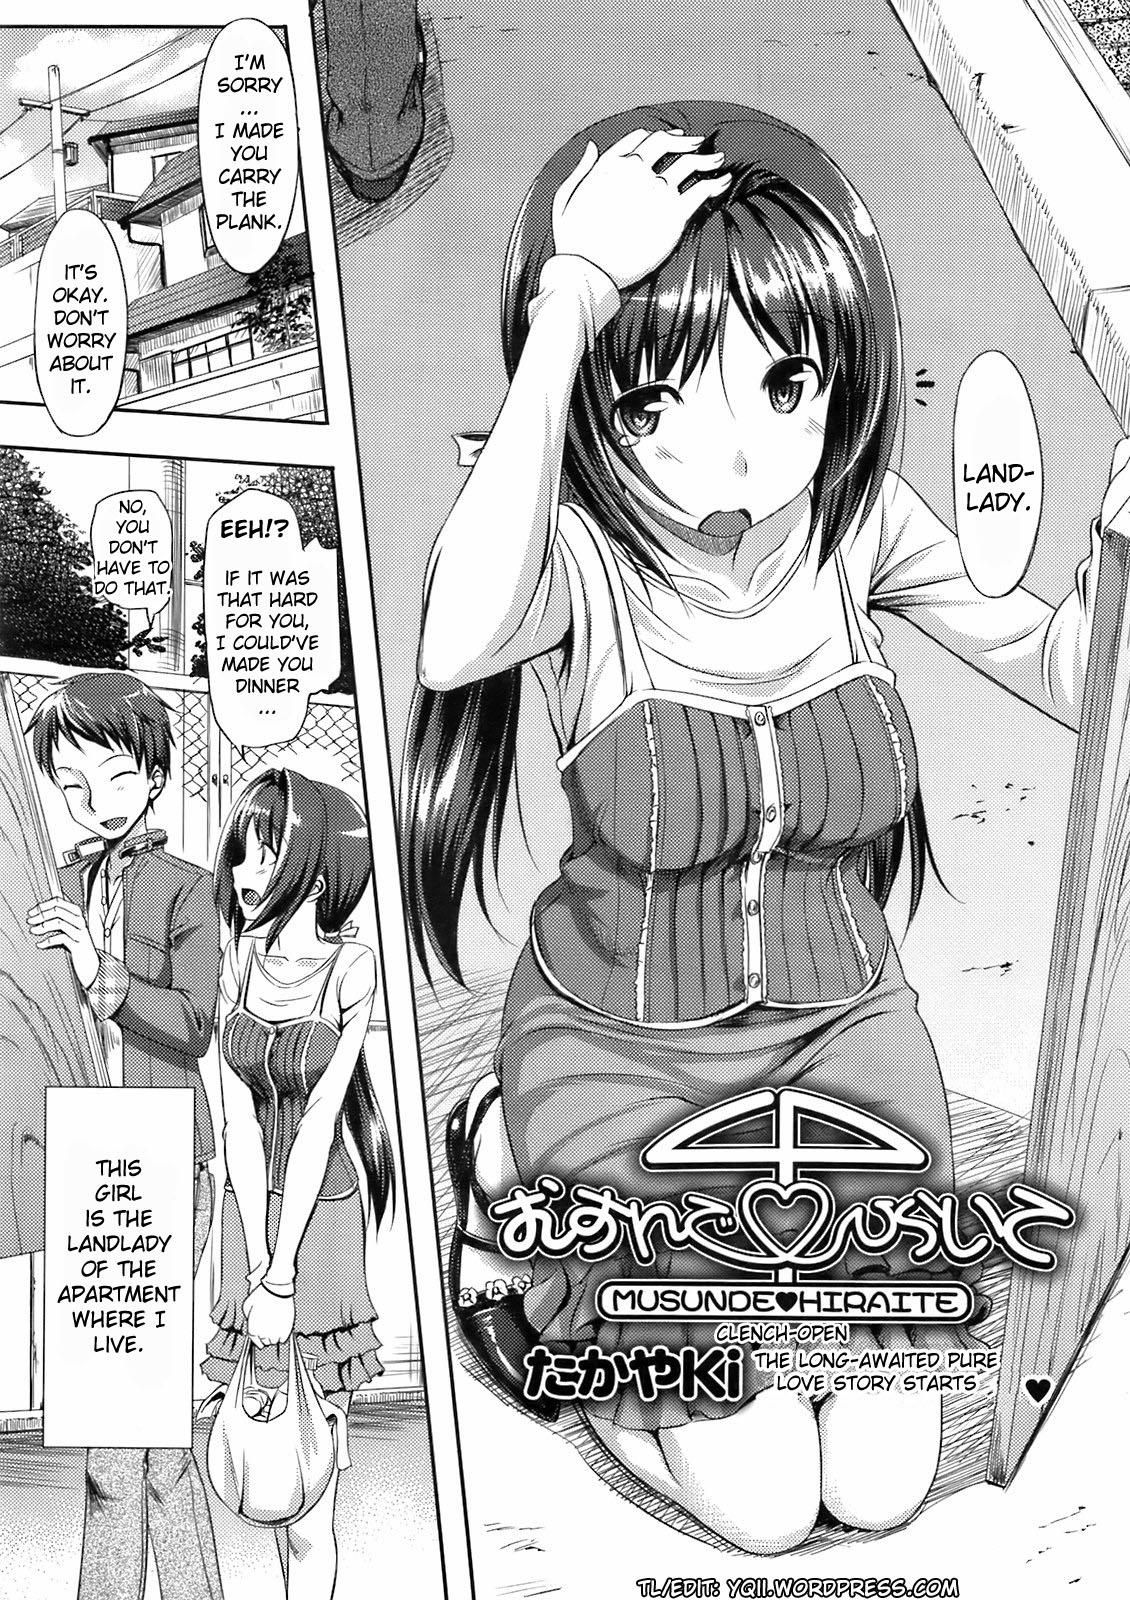 Solo Female Musunde Hiraite Ch. 1-4 Picked Up - Page 2